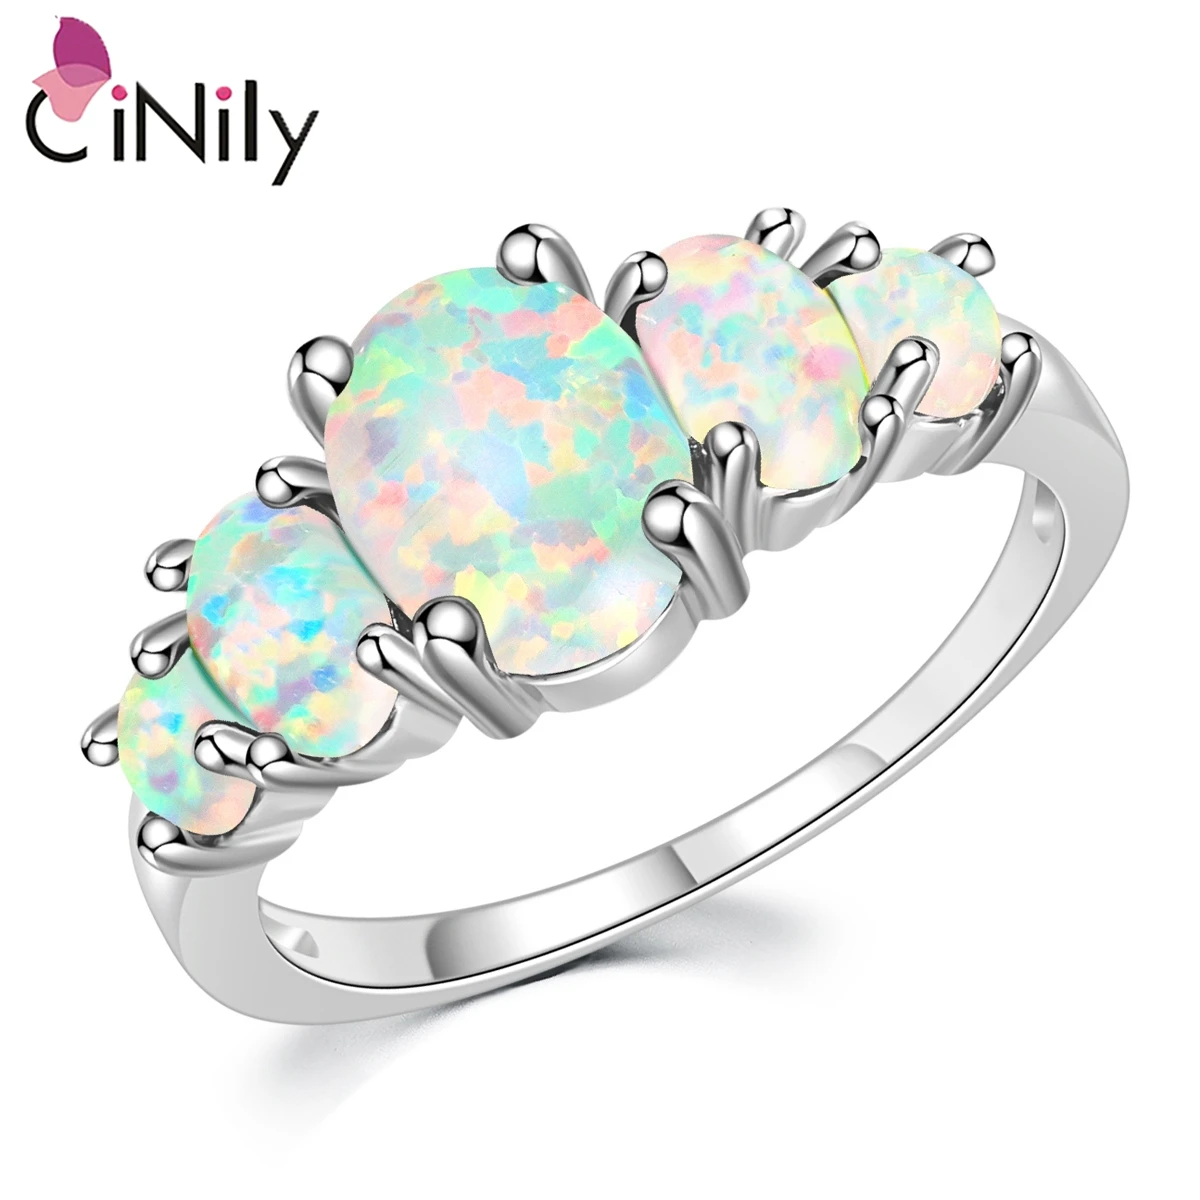 CiNily White Fire Opal Rings With Oval Big Stone Silver Plated Wedding Engagement Minimalist Bohemia Boho Jewelry Size 10 11 12